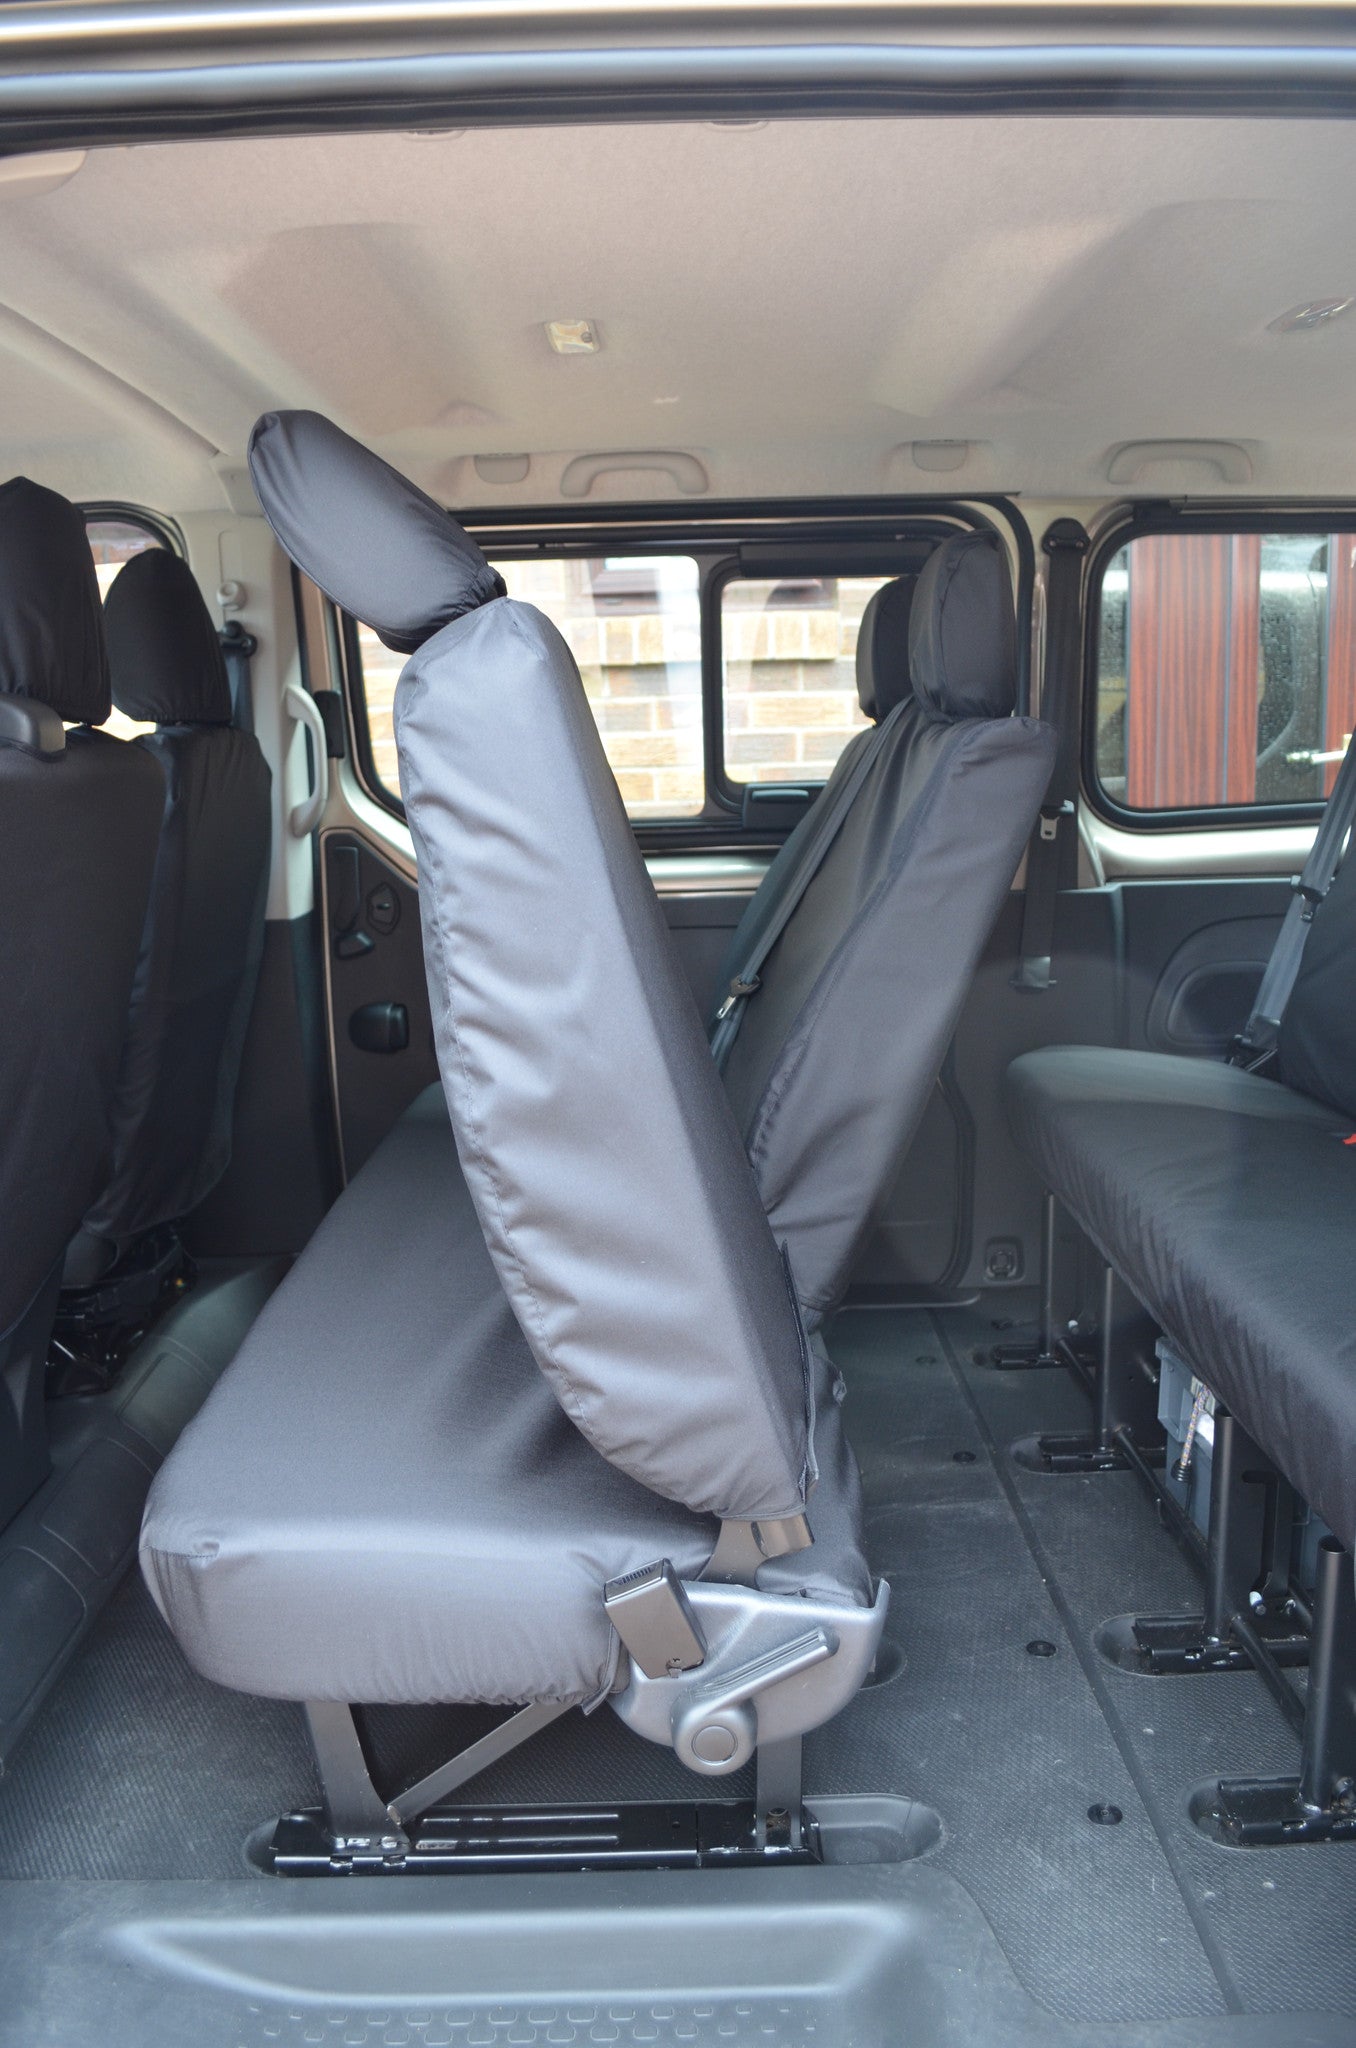 Fiat Talento Combi 2016+ 9-Seater Minibus Seat Covers Black / 2nd Row Rear Turtle Covers Ltd